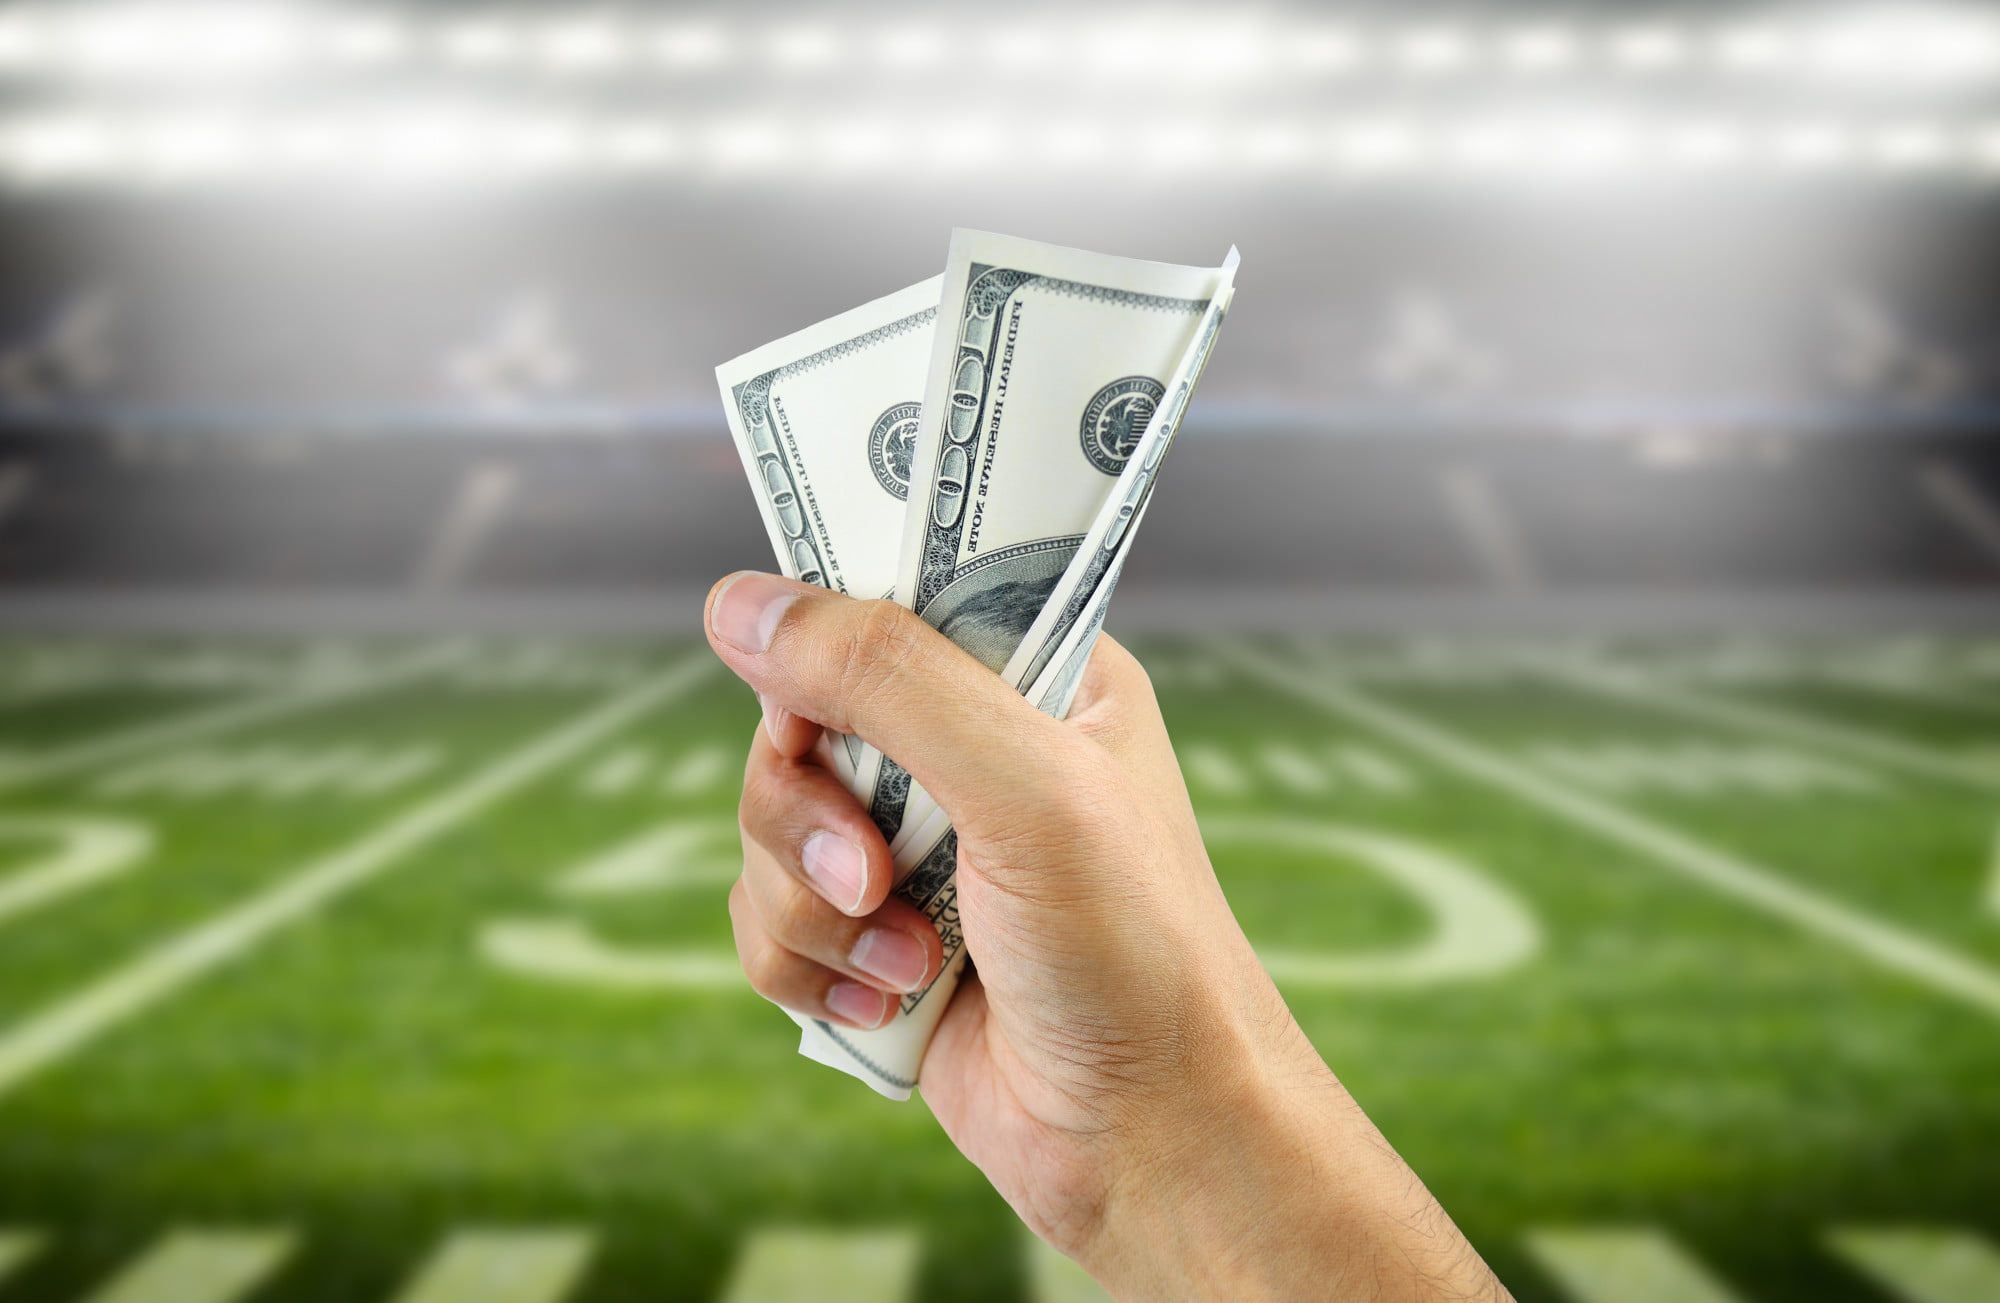 Are you new to the world of sports betting and looking to make the most lucrative bets? Click here to discover the best sports to bet on.